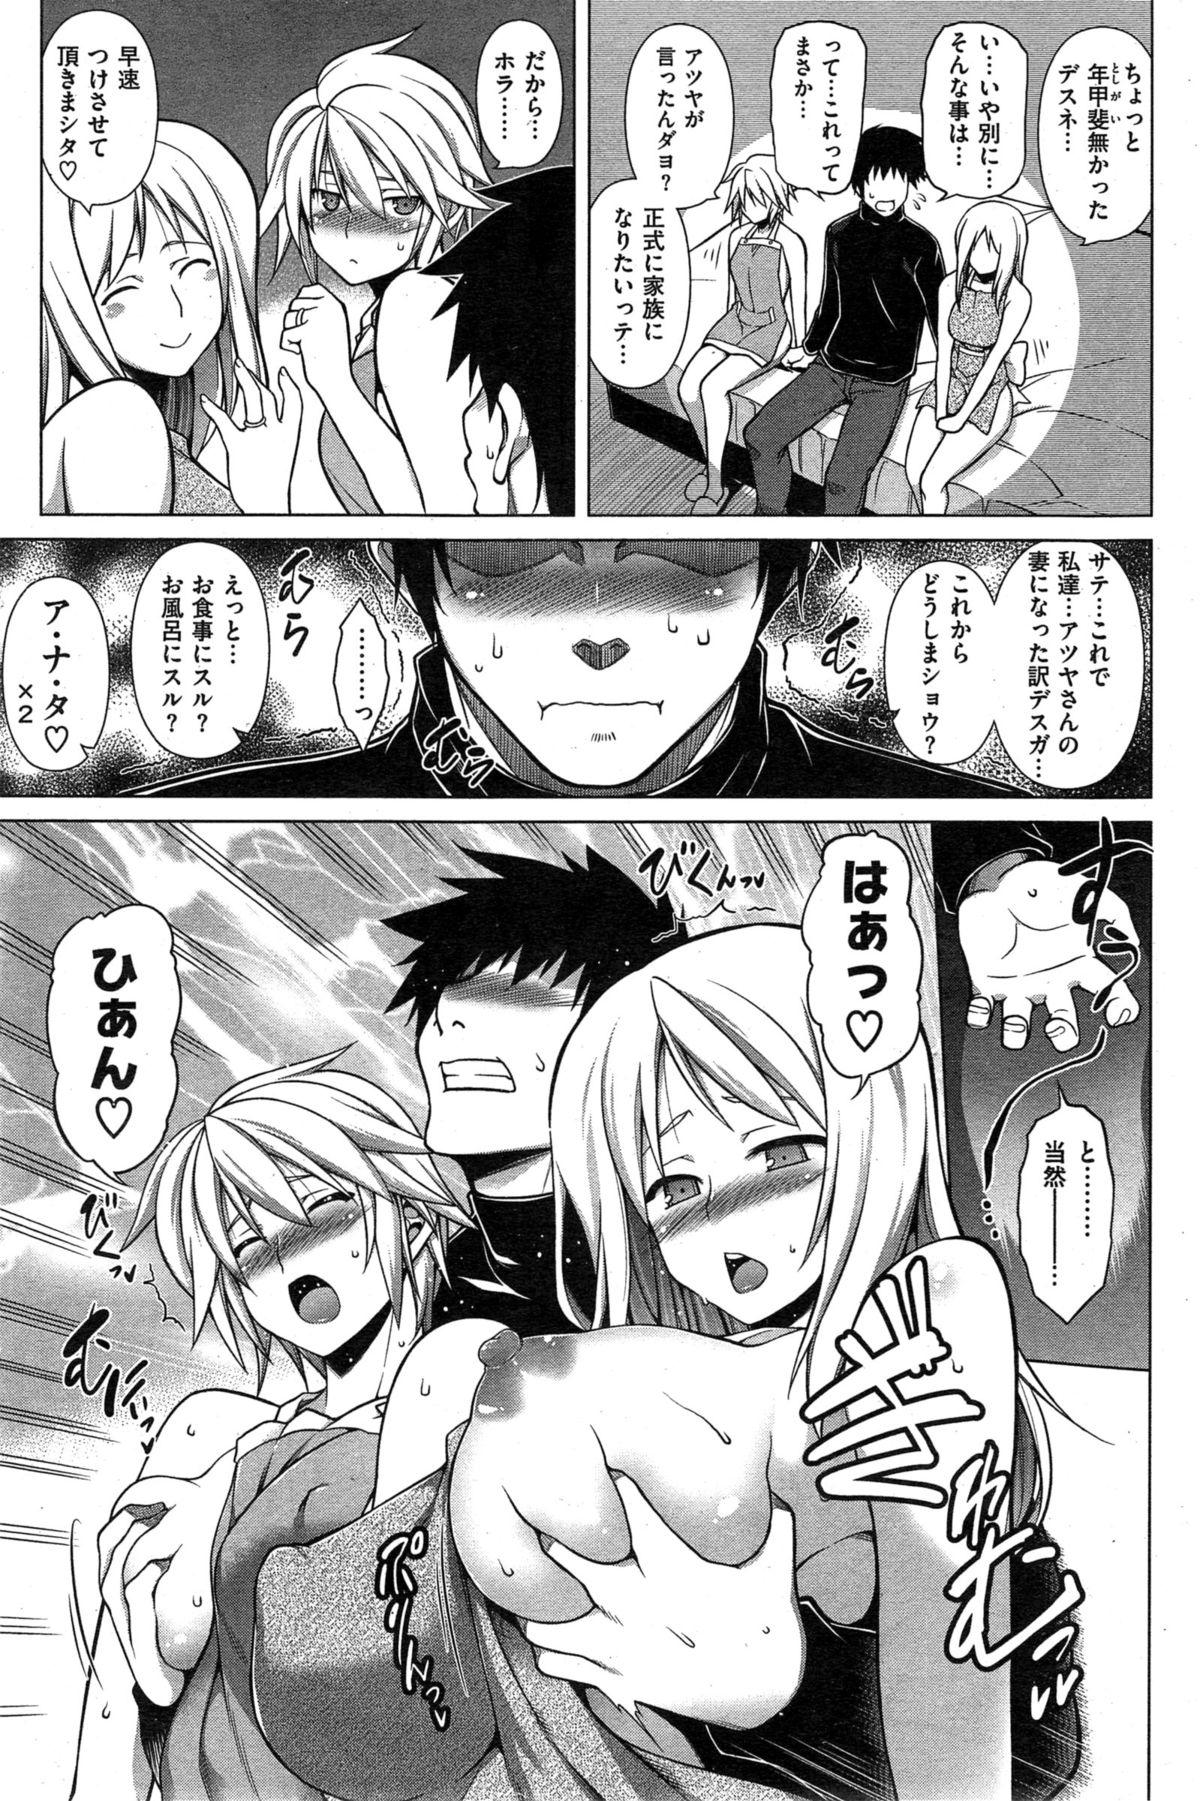 [TANABE] Ougon Taiken - Gold Experience page 25 full